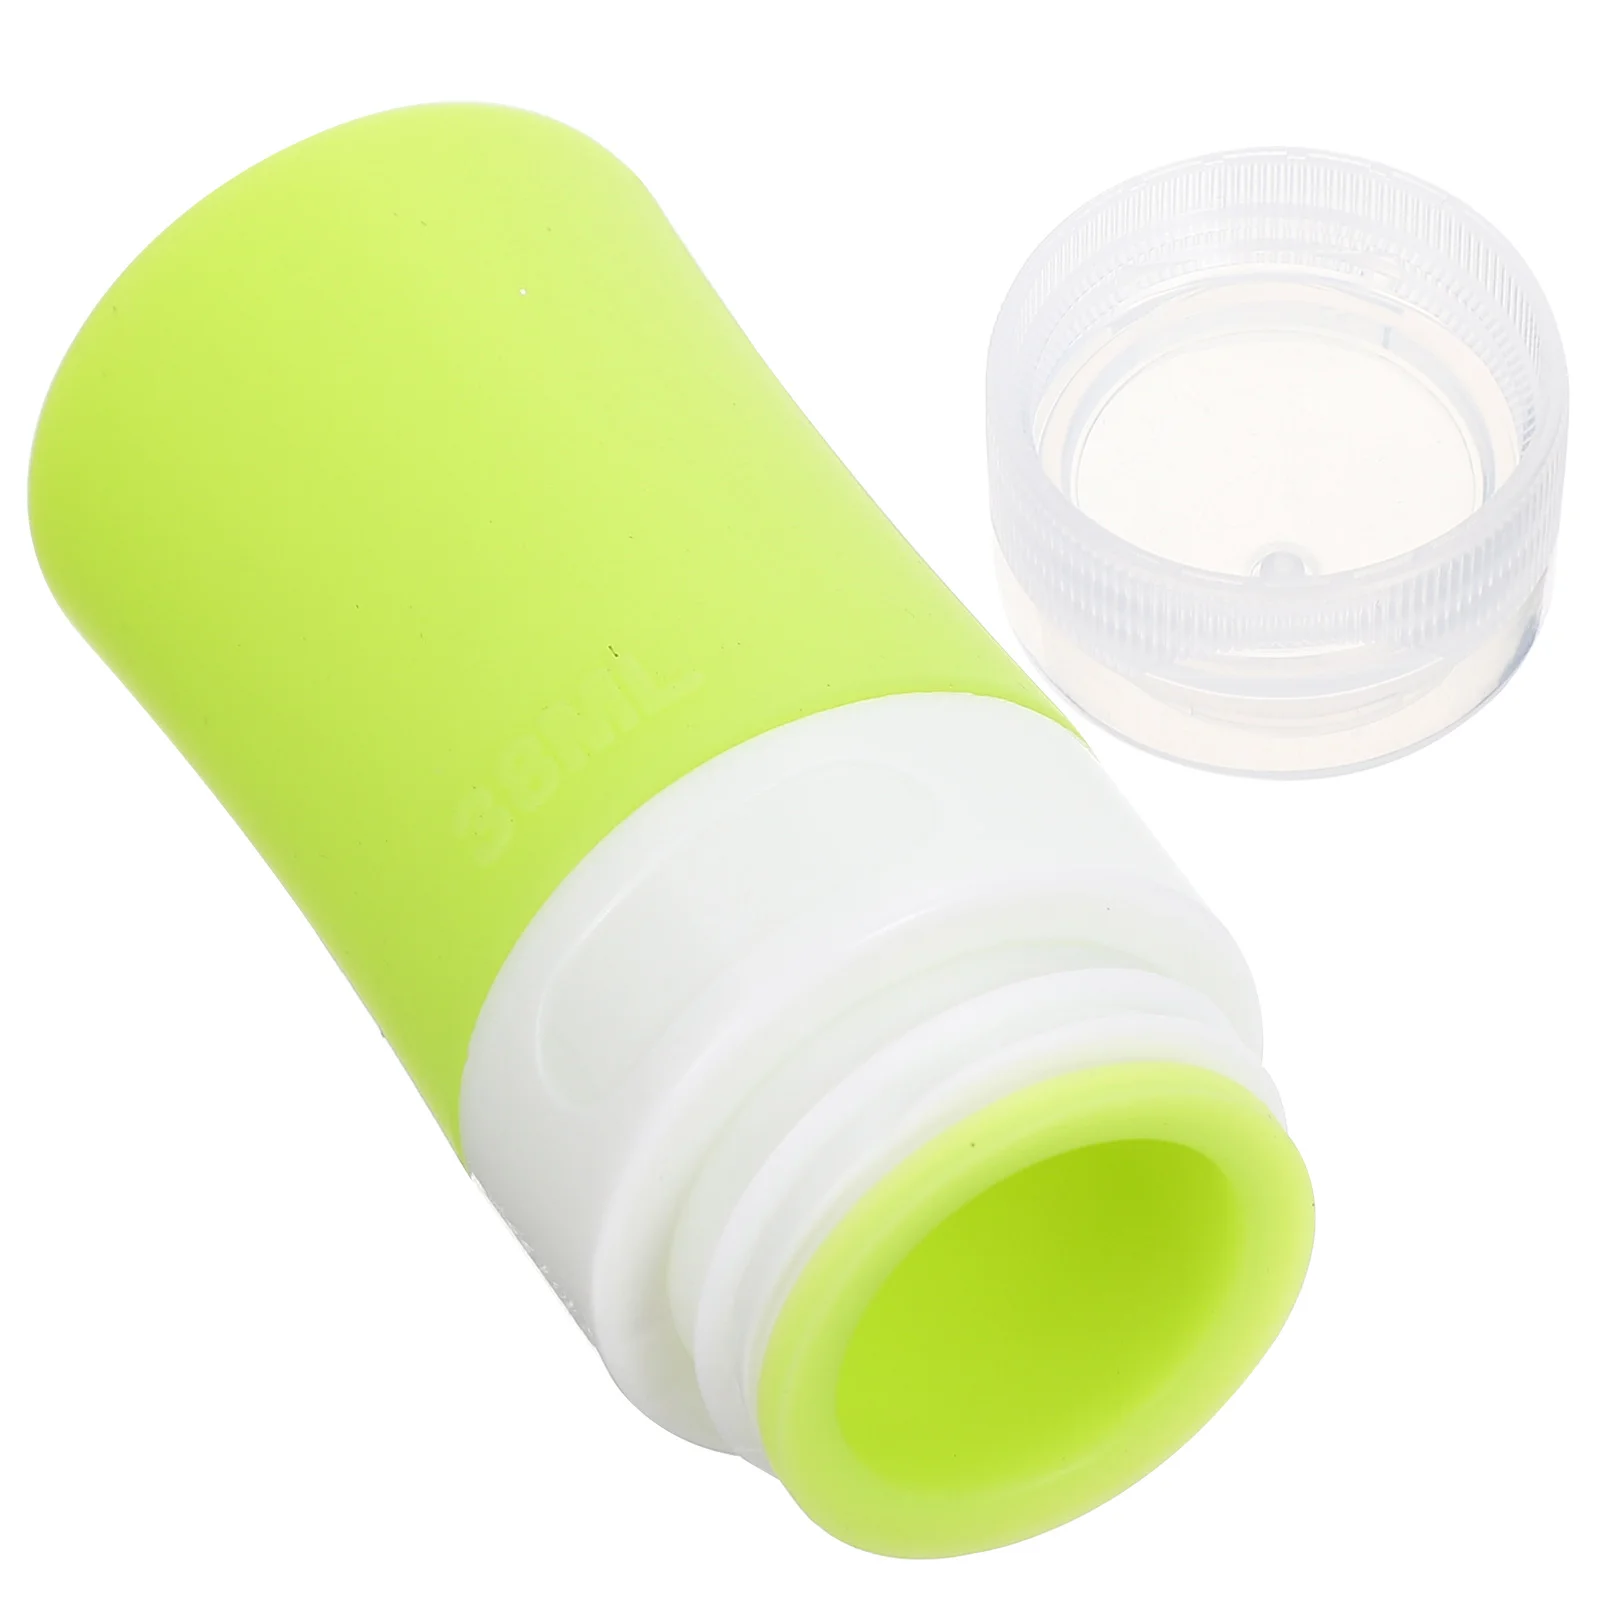 

Cylindrical Bottling Lotion Dispenser Bottle Silicone Travel Bottles Cosmetics Storage Makeup Containers Shampoo